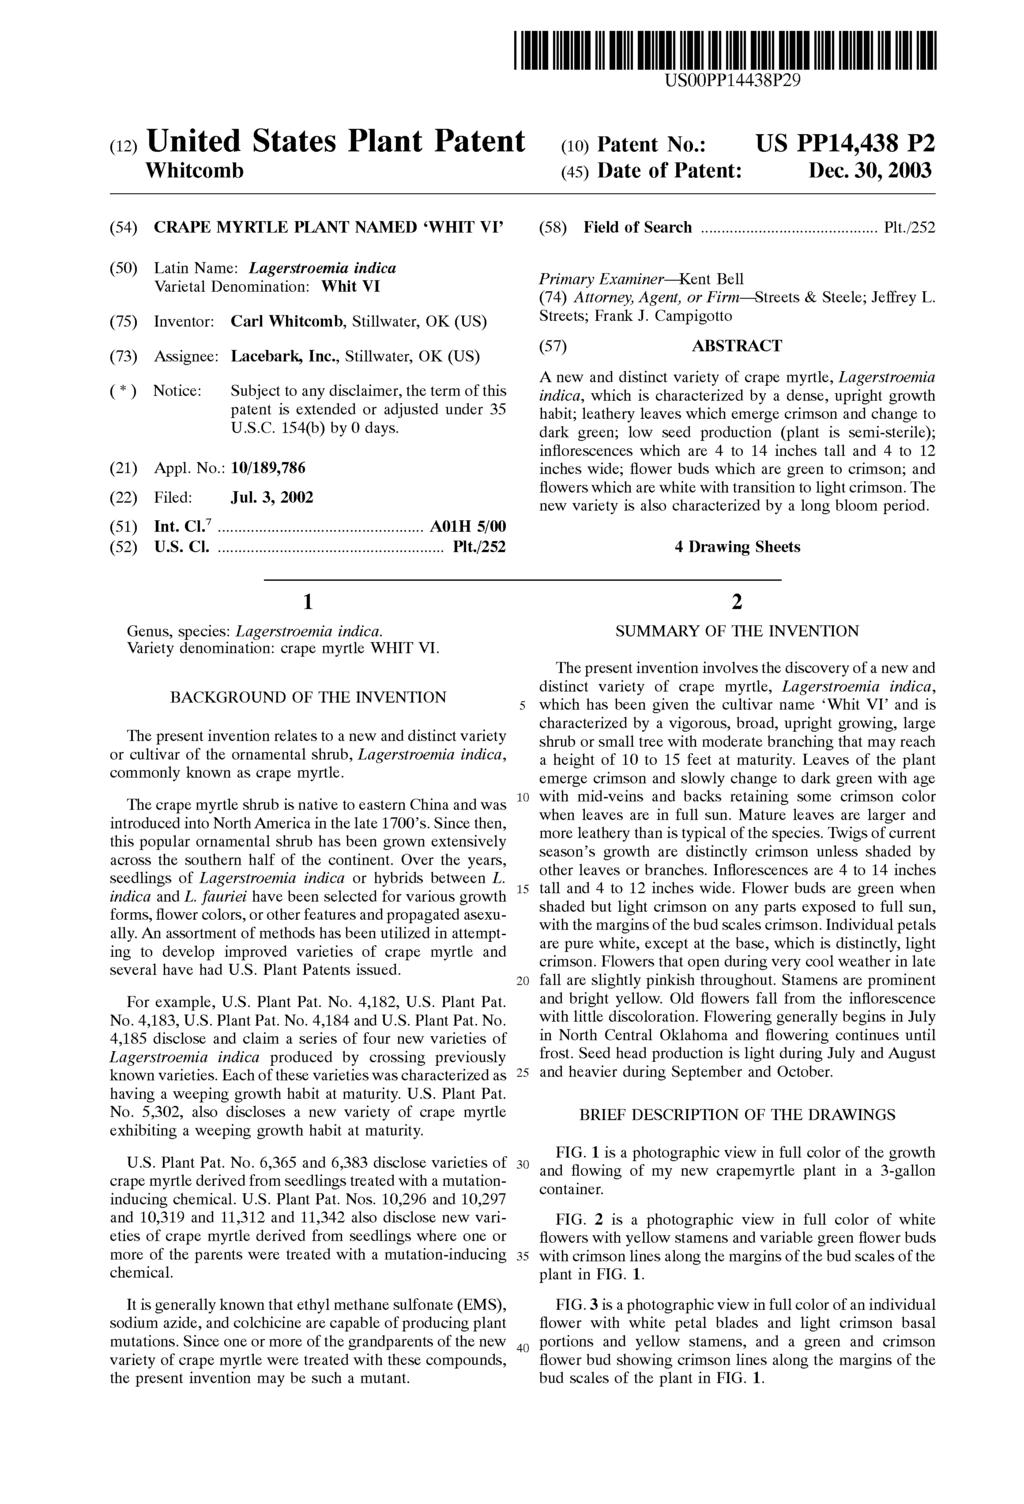 (12) United States Plant Patent USOOPP14438P29 (10) Patent No.: US PP14,438 P2 Whitcomb (45) Date of Patent: Dec. 30, 2003 (54) CRAPE MYRTLE PLANT NAMED WHIT VI (58) Field of Search... Plt.